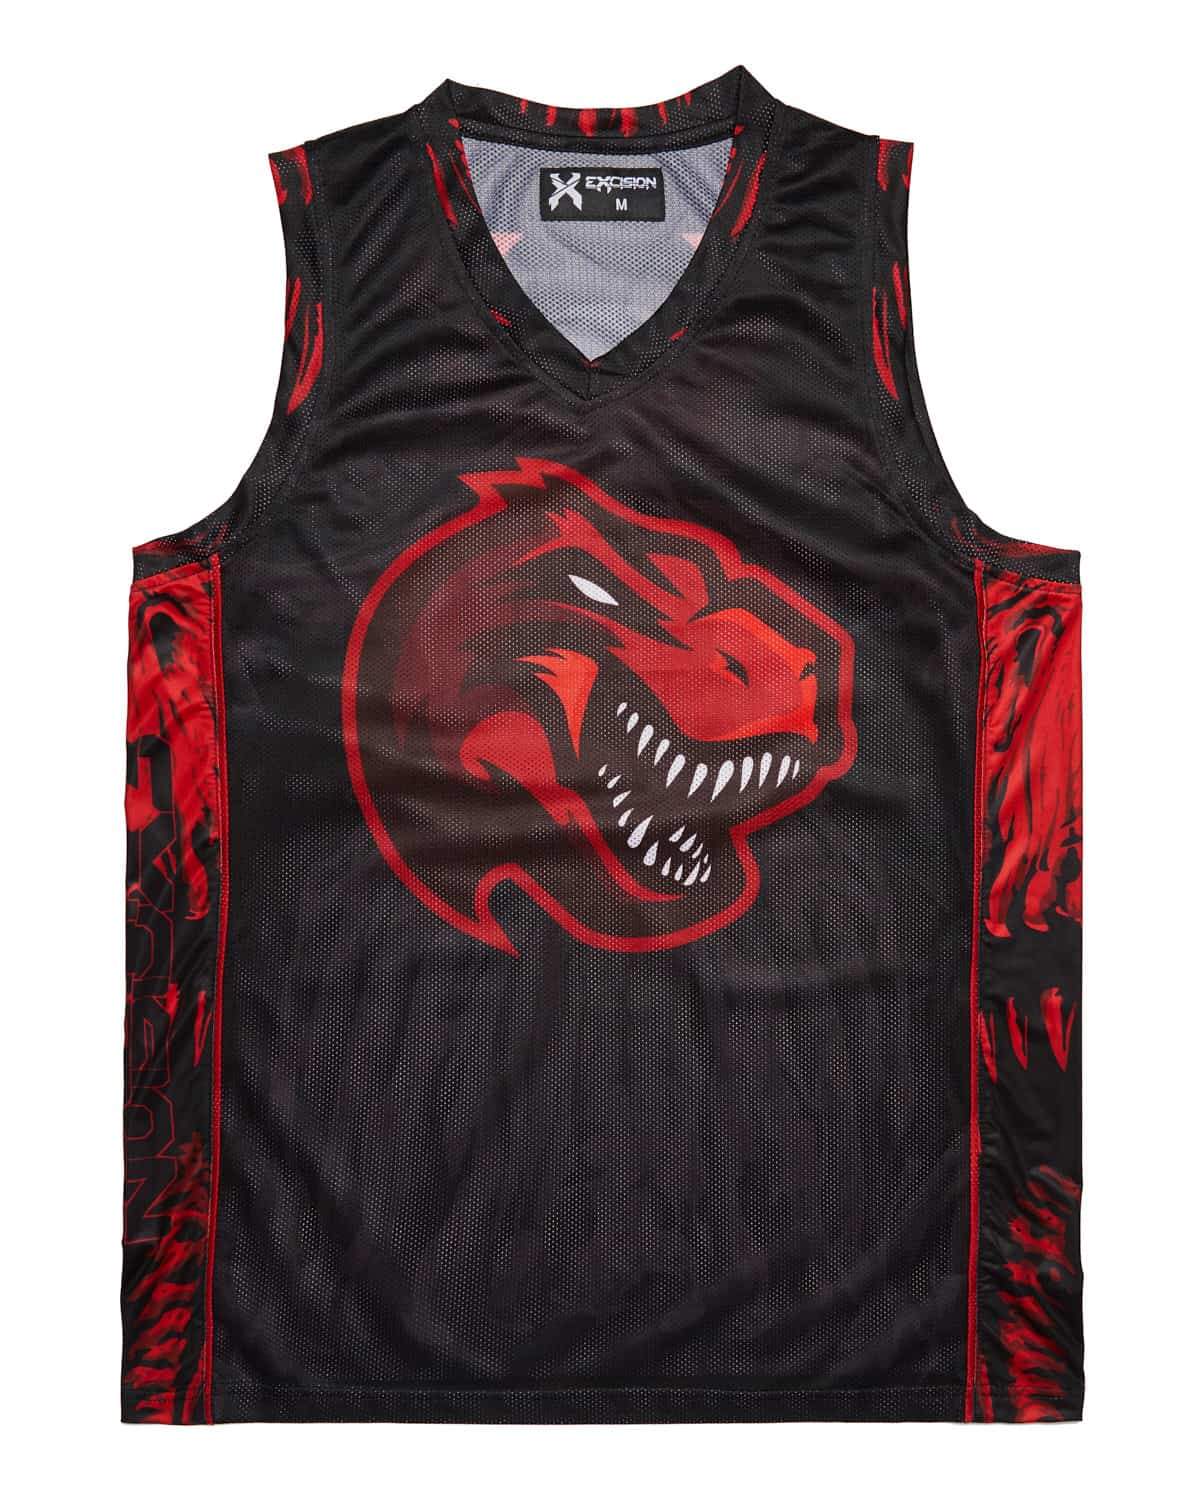 Black and Red Basketball Logo - 'Excision Rex' Basketball Jersey - Red/Black